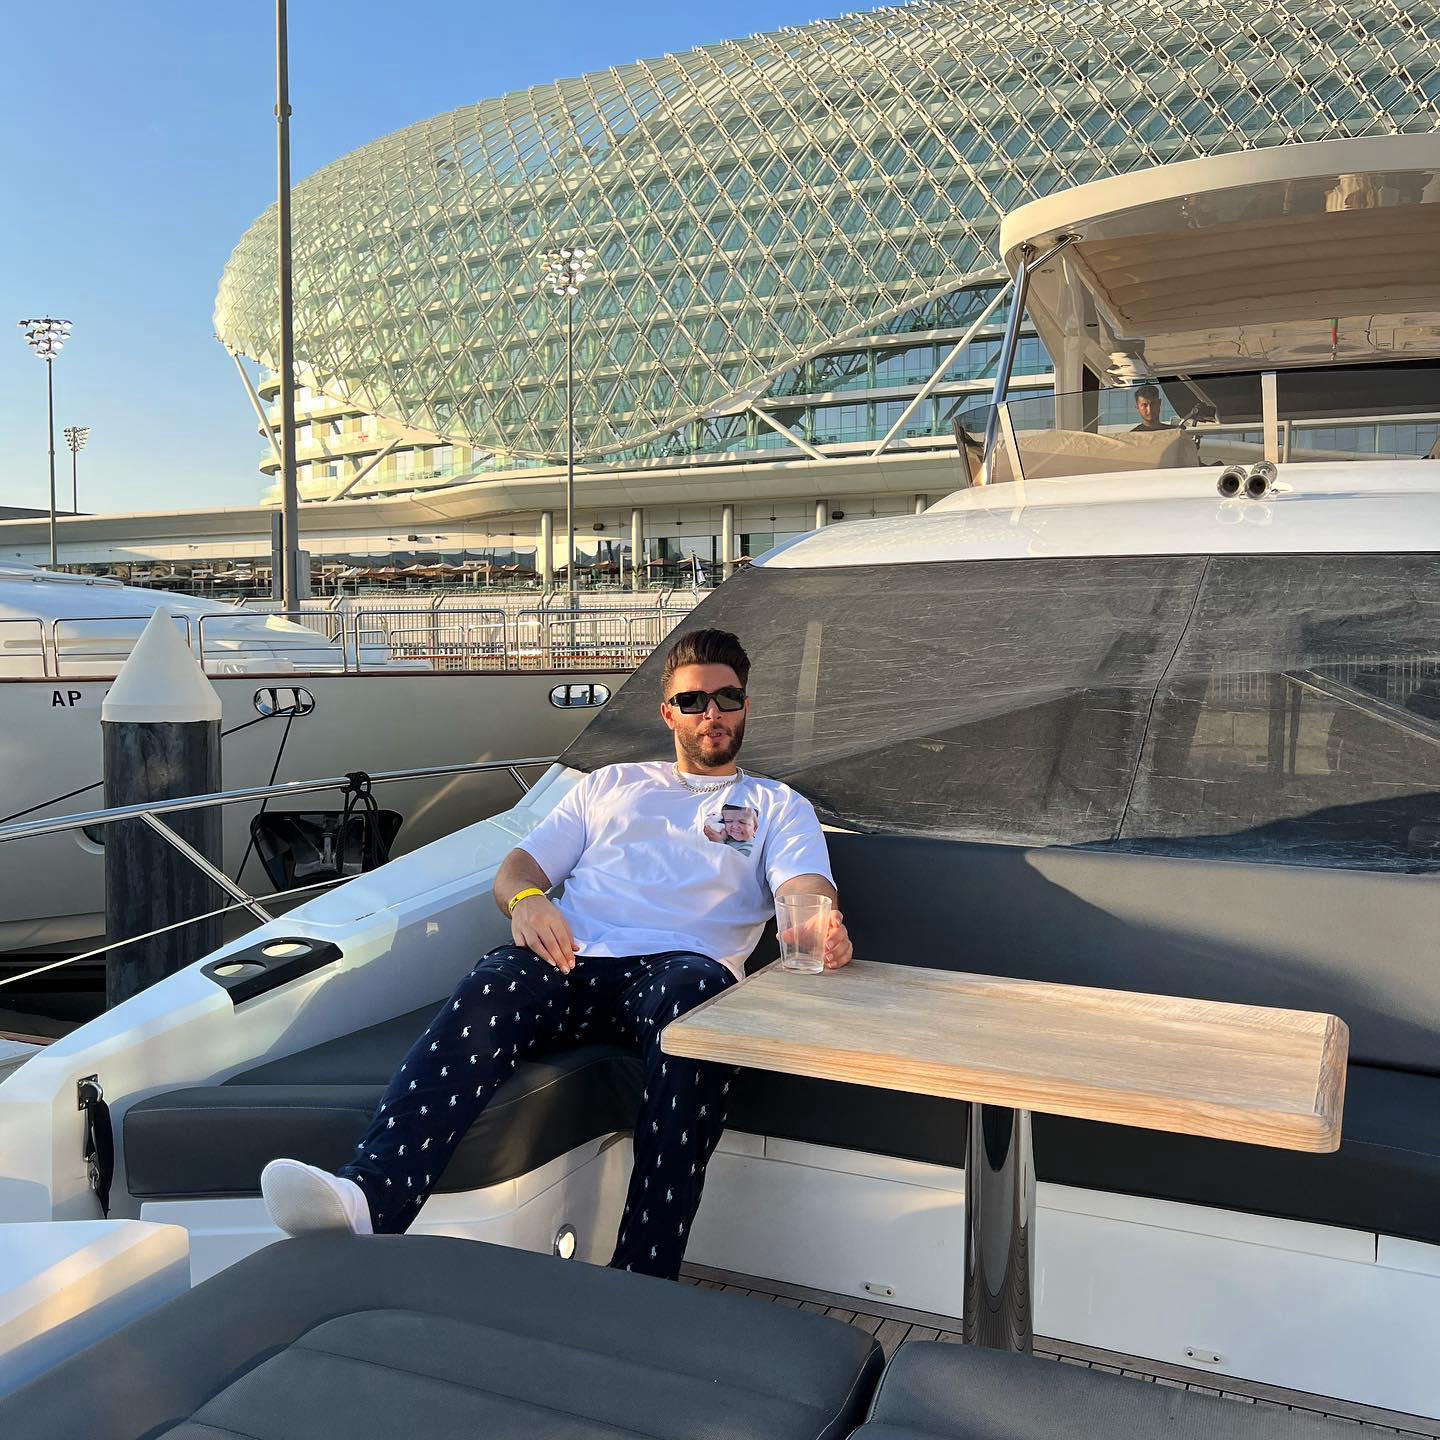 image  1 In case you wondering, Yes i hang out in a PJ on a yacht, yes, I don’t give a F anymore